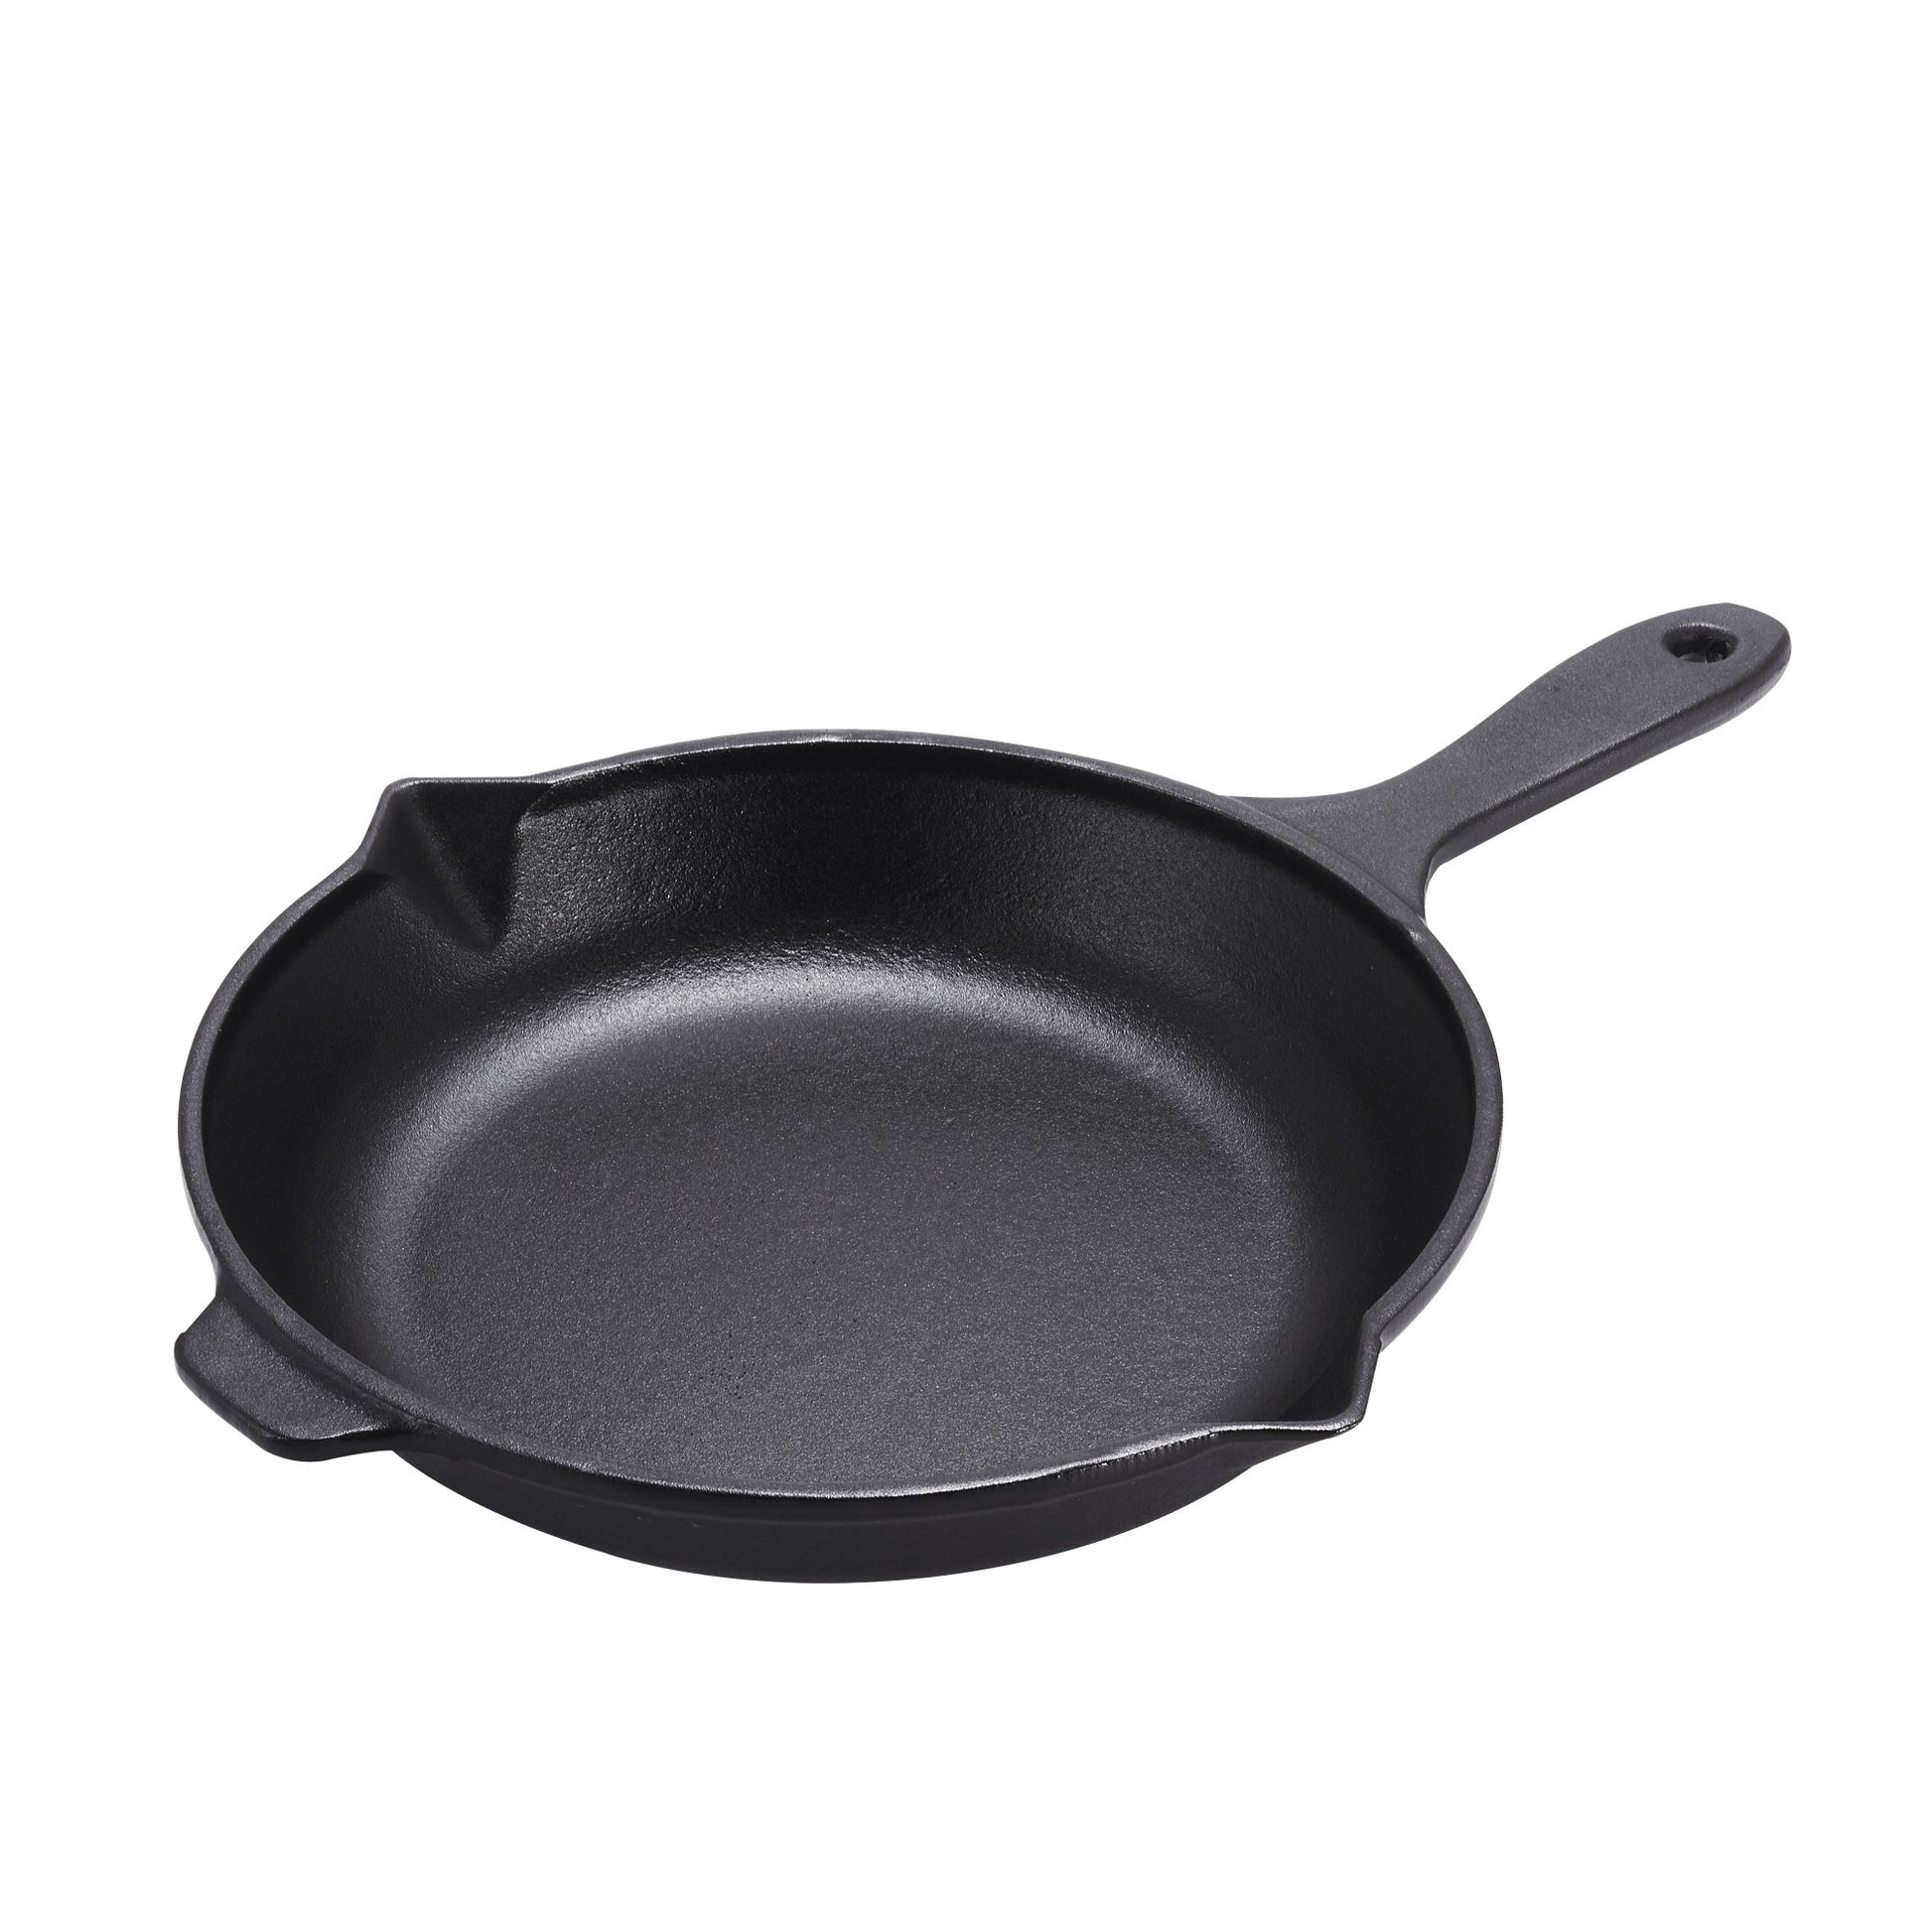 Cast Iron Deep Frying Pan with Lid - 9.4